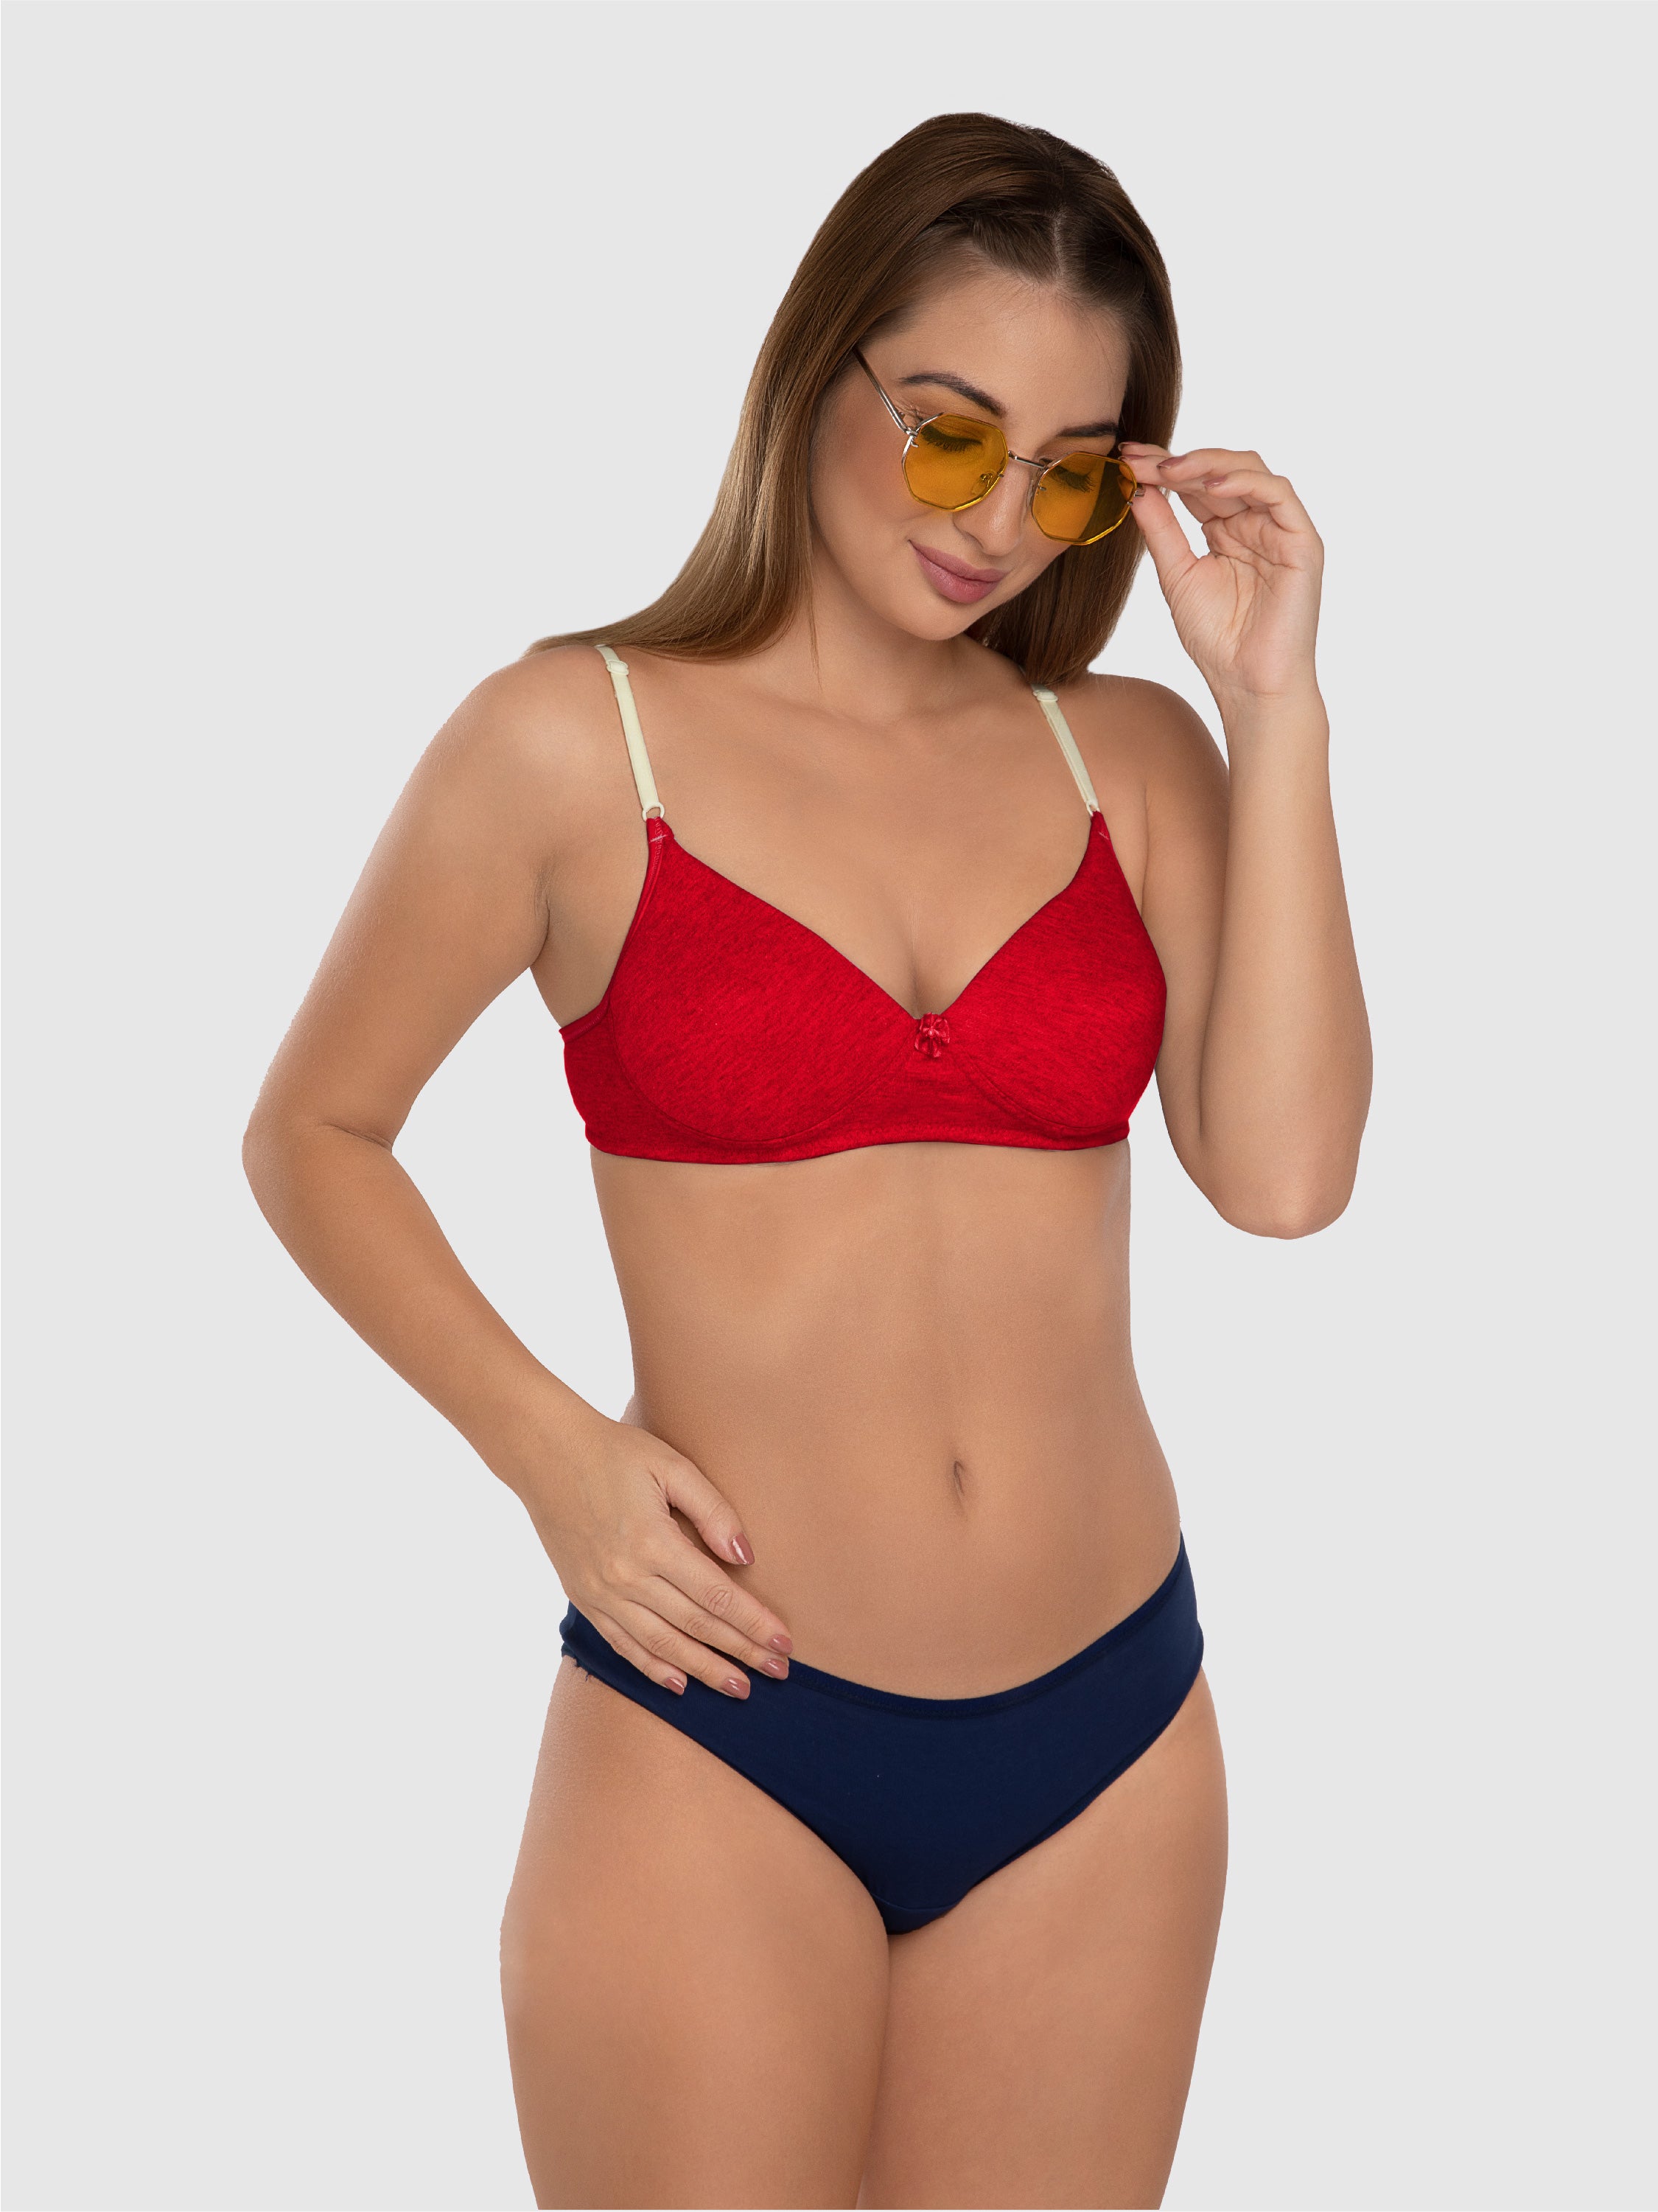 Daisy Dee Red Padded Non Wired Full Coverage Bra NJZZ-Red